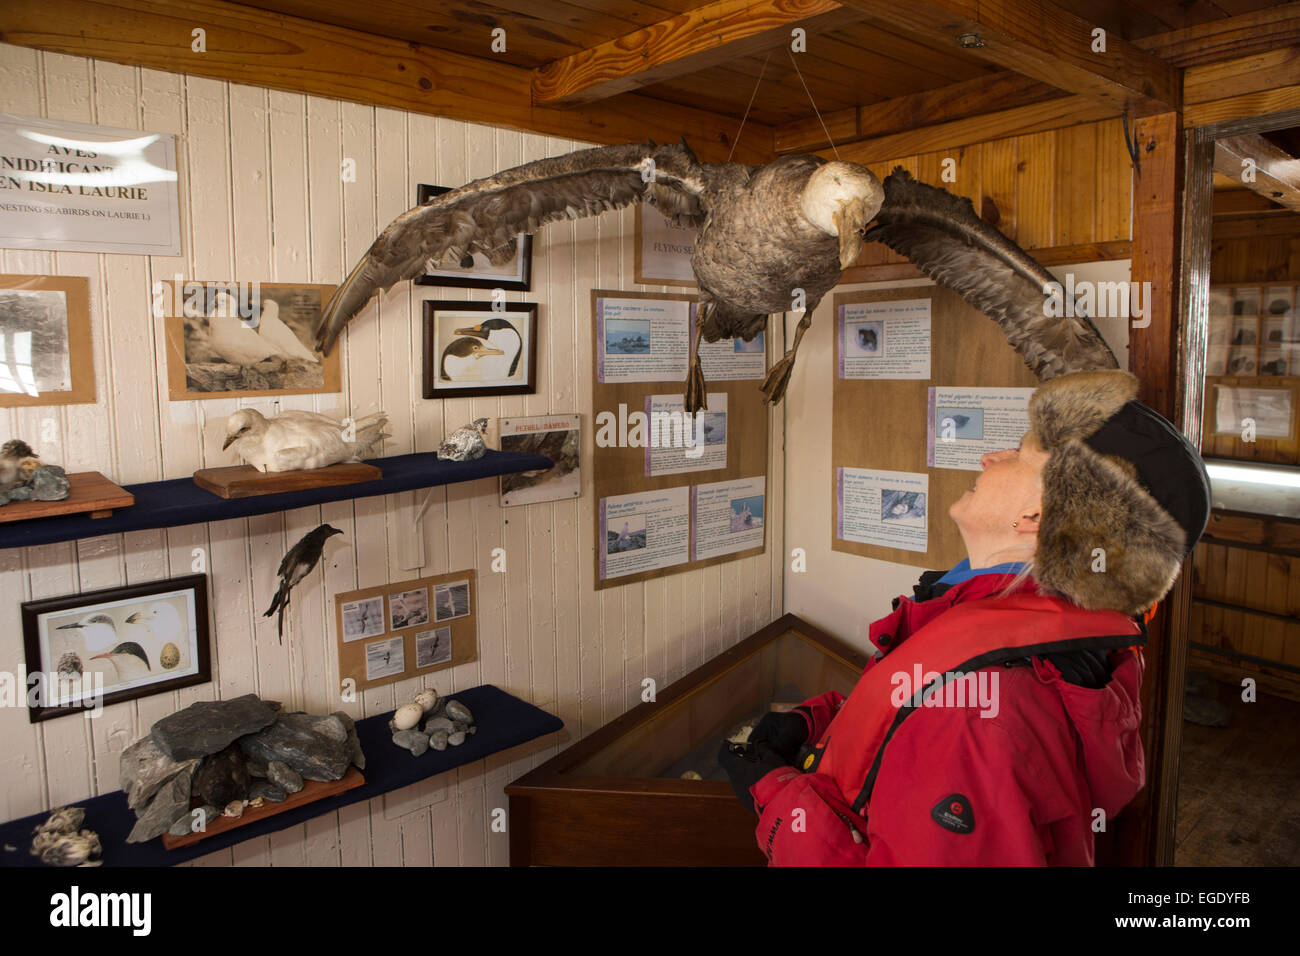 South Orkney Islands, Laurie Island, Orcadas base museum, badly stuffed birds Stock Photo